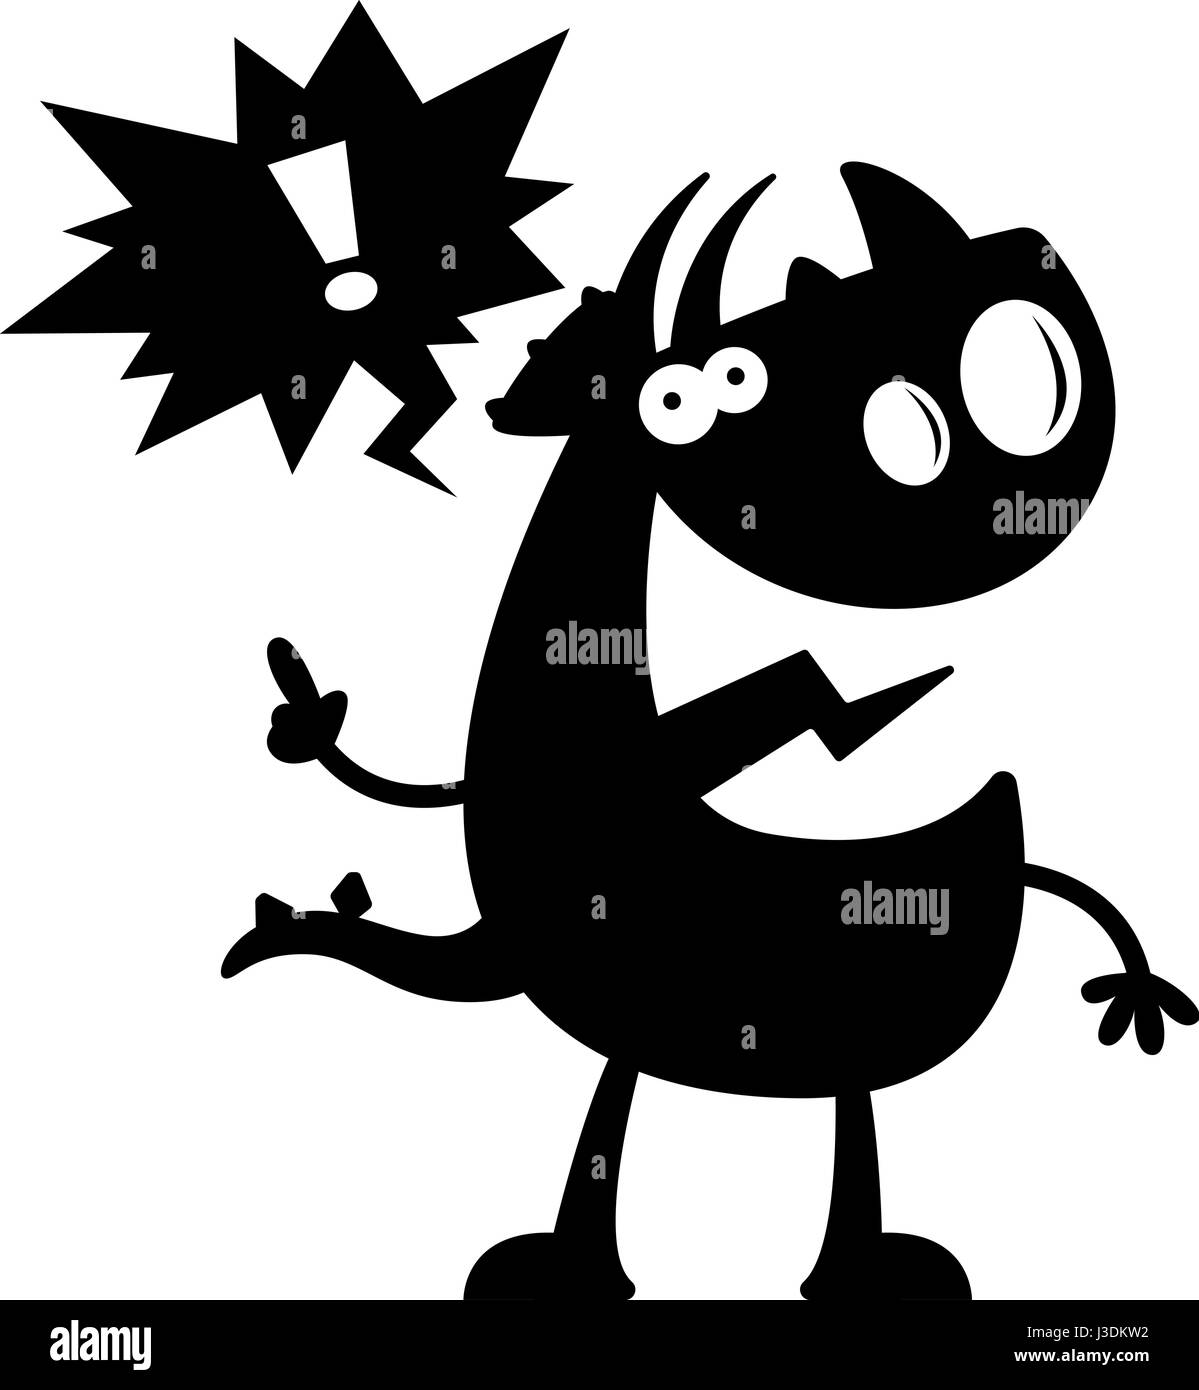 A cartoon silhouette of a triceratops dinosaur talking. Stock Vector